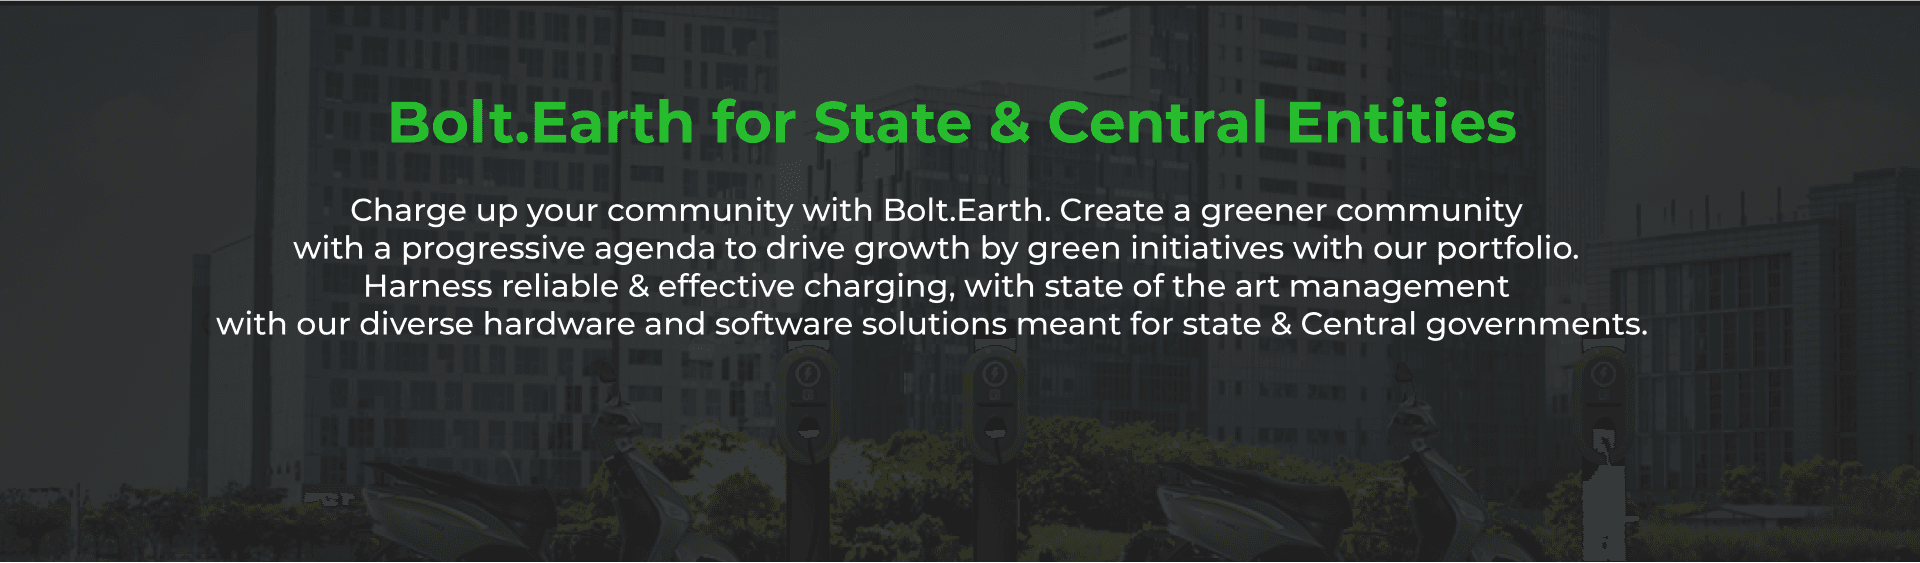 Bolt.Earth for State & Central Entities'